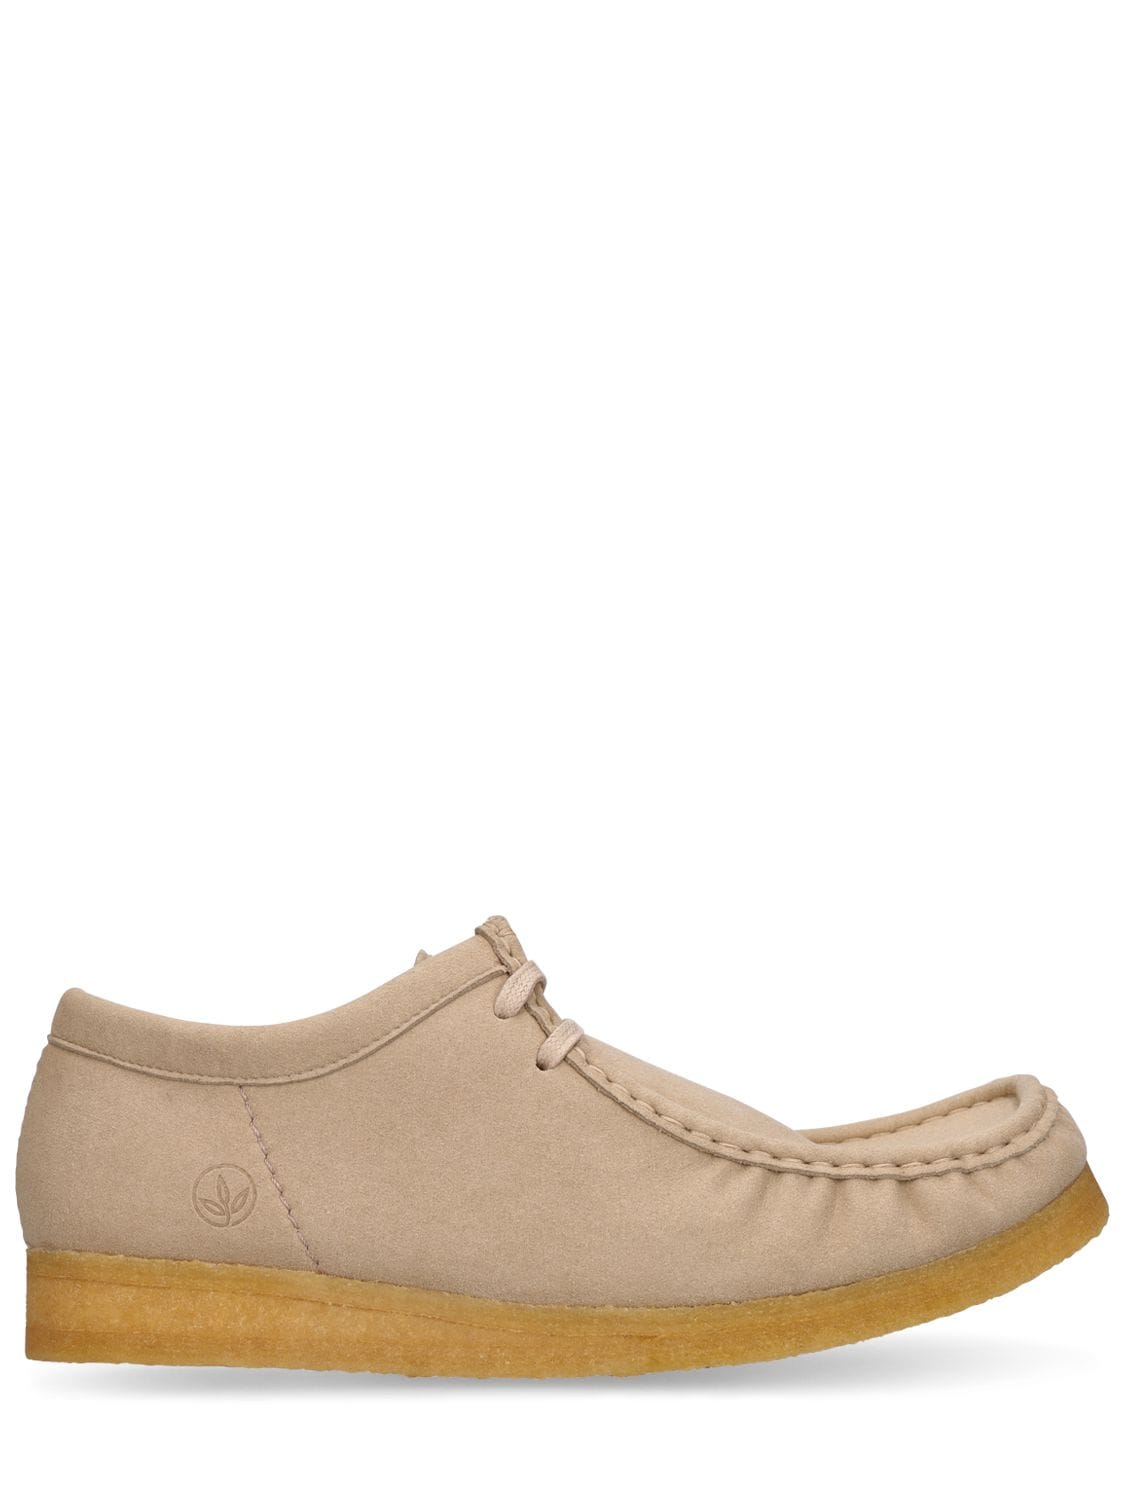 CLARKS ORIGINALS 30mm Wallabee Leather Lace-up Shoes